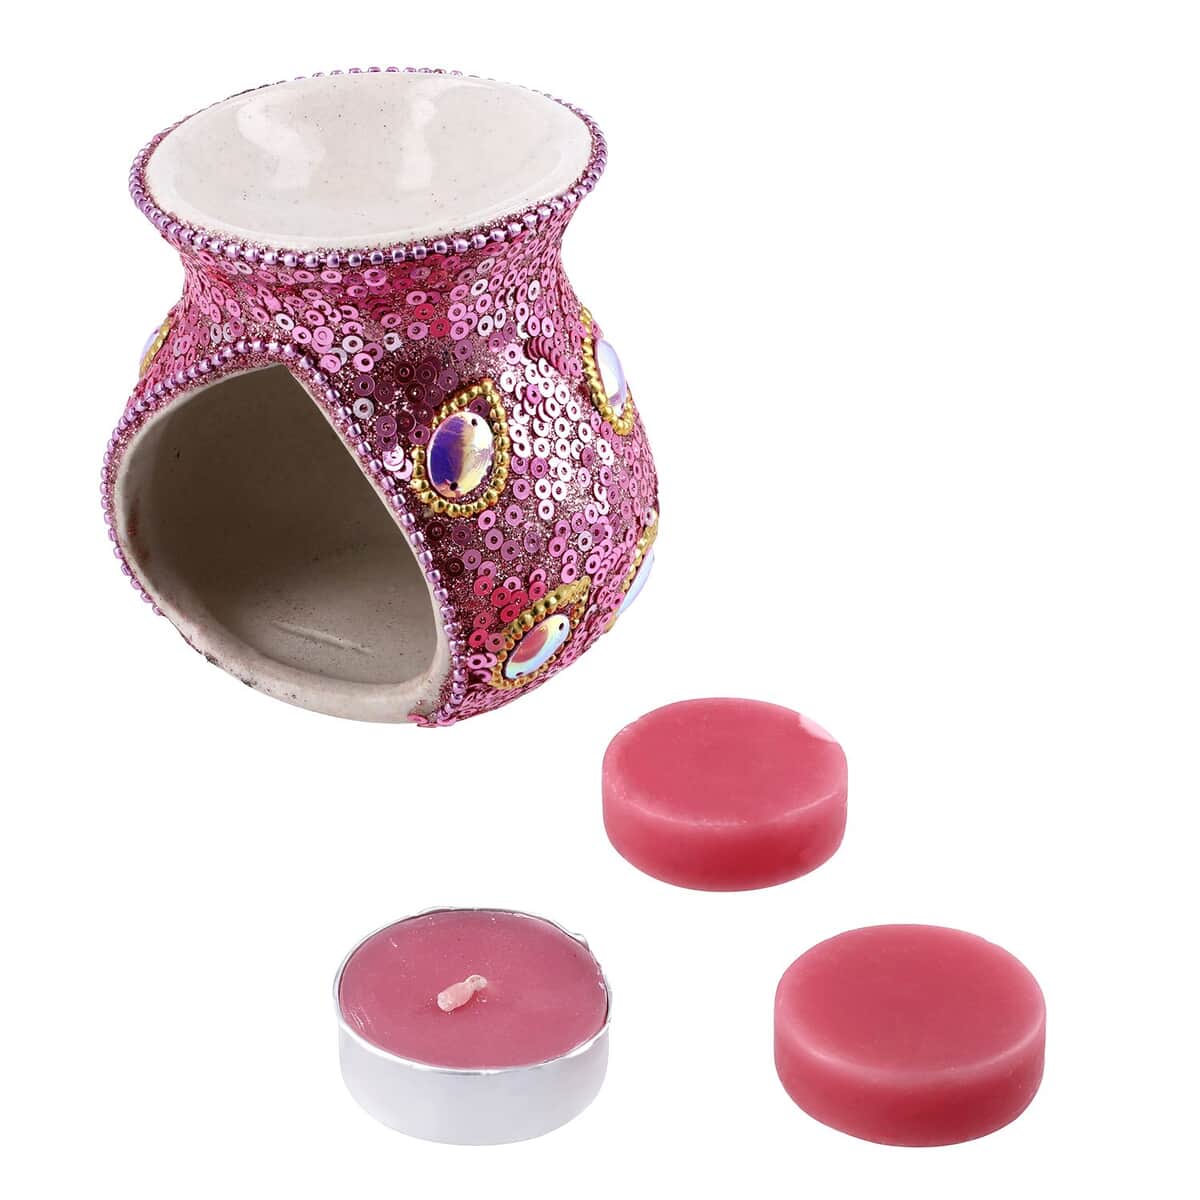 "Peacock Print Ceramic Wax Tart Burner Set  Fragrance: Frosted Vanilla Color: Pink Size: 3X3X7 Inches" image number 0